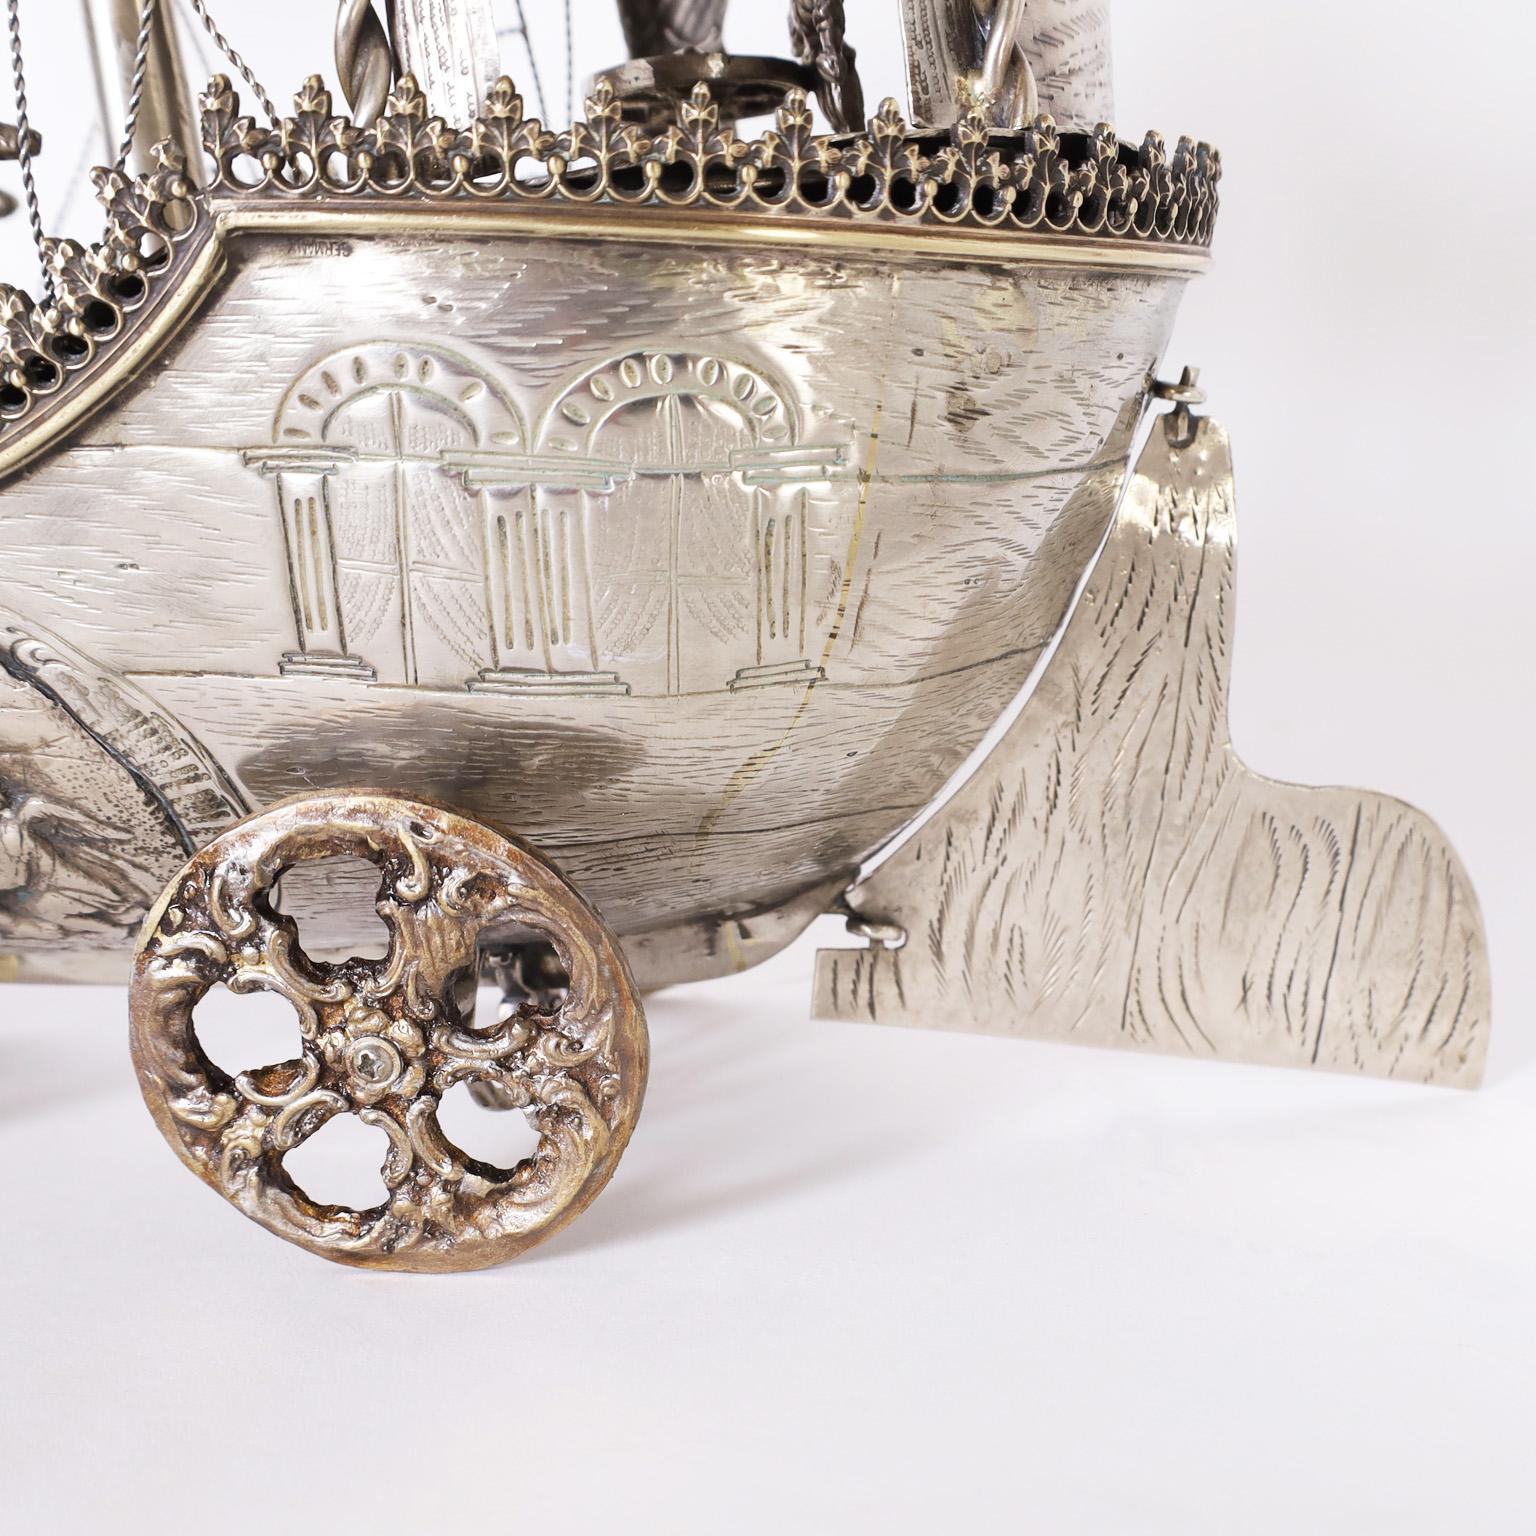 Antique Italian Silver on Brass Sailing Ship on Wheels For Sale 5